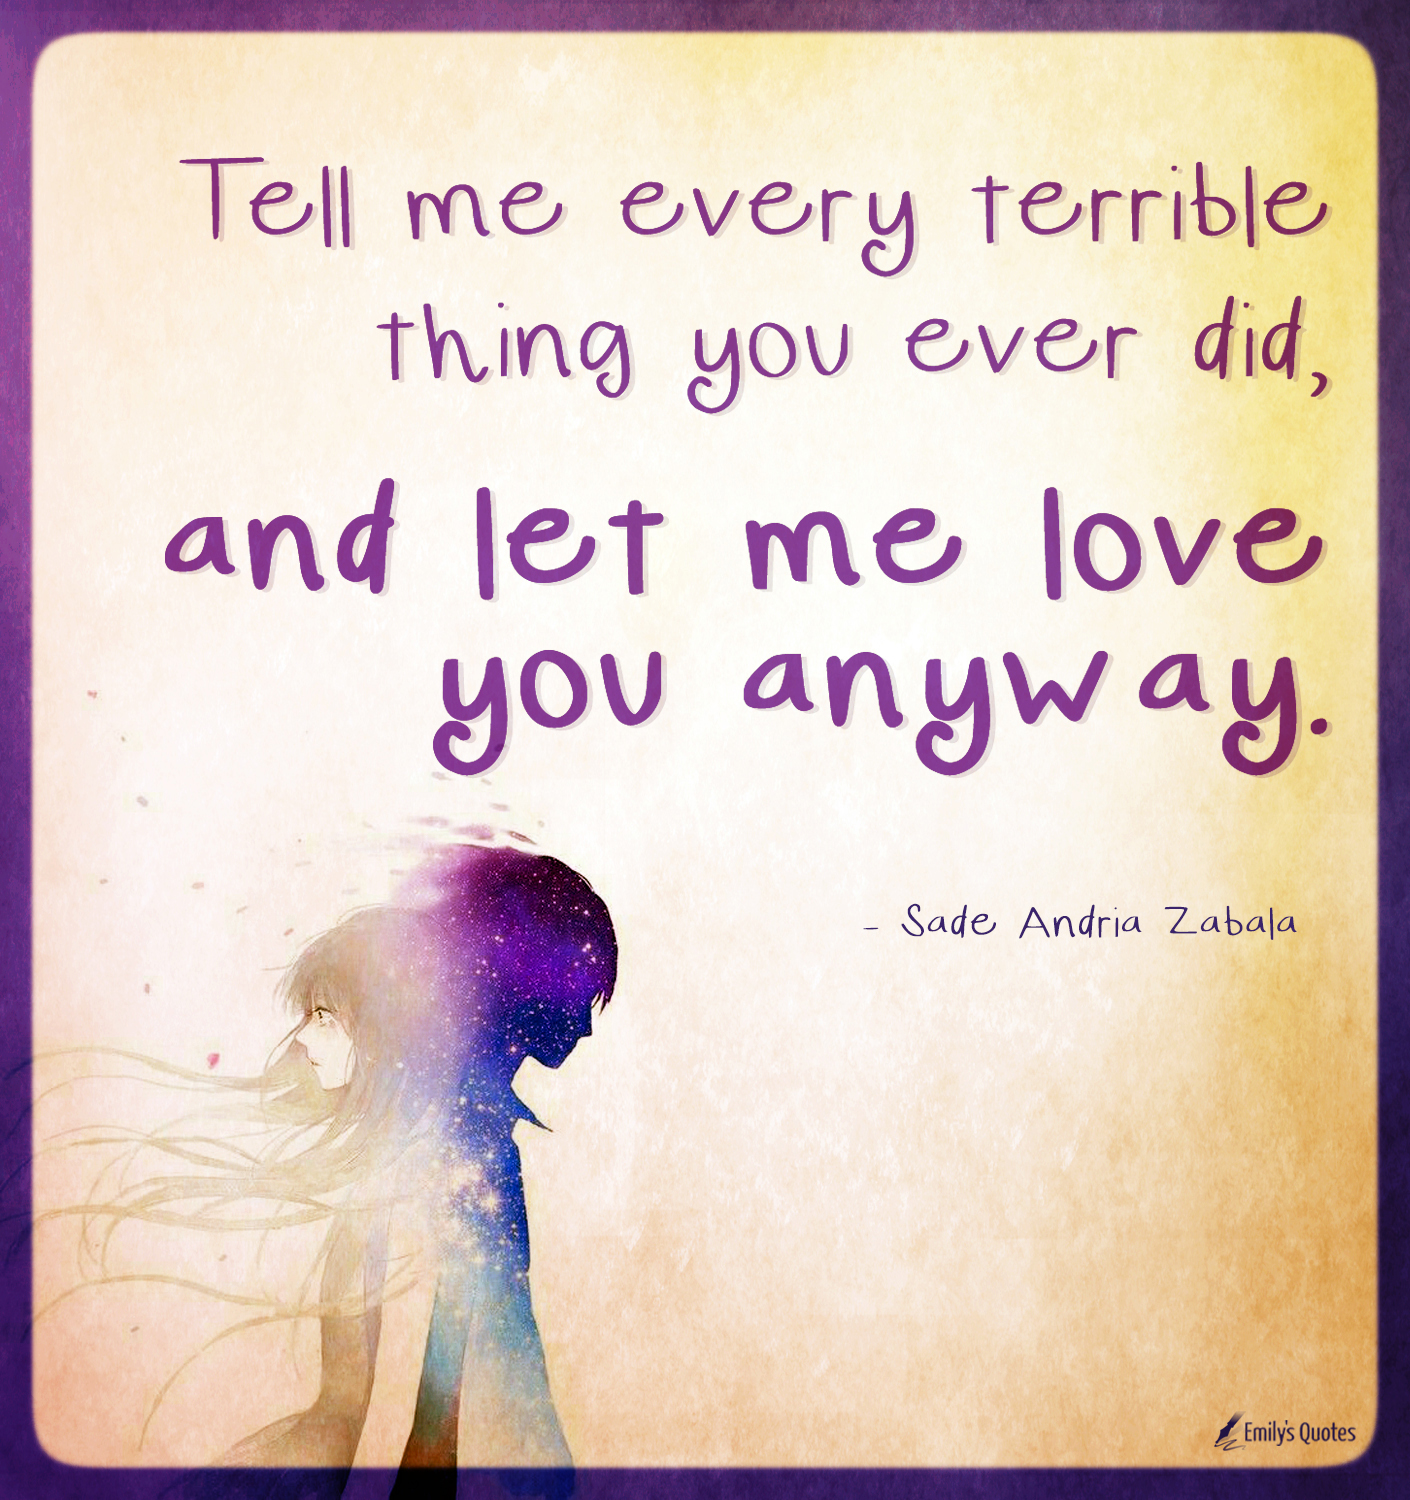 Tell me every terrible thing you ever did, and let me love you anyway